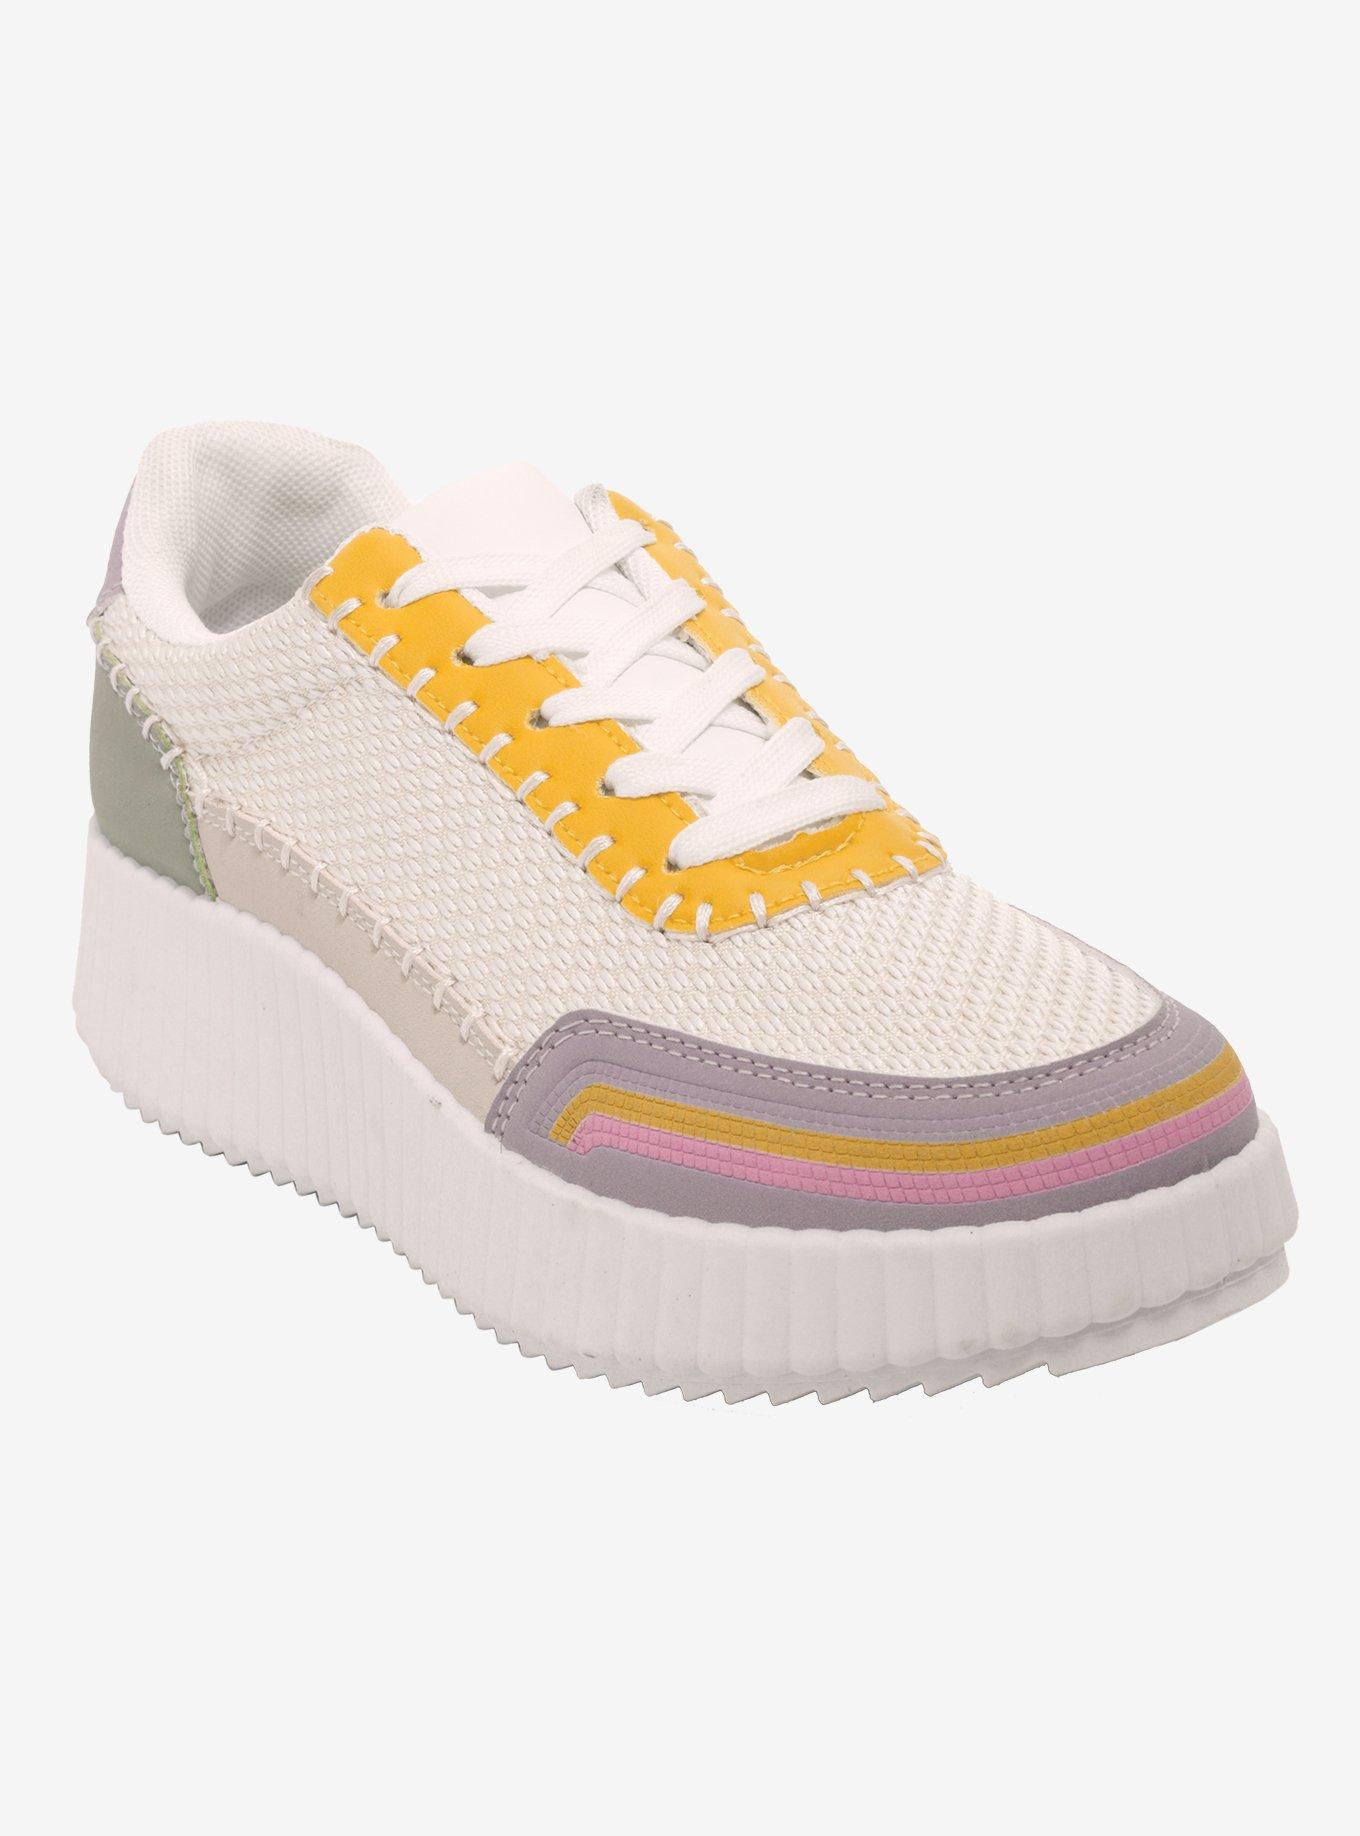 Chinese Laundry Muted Pastel Color-Block Sneakers, MULTI, hi-res